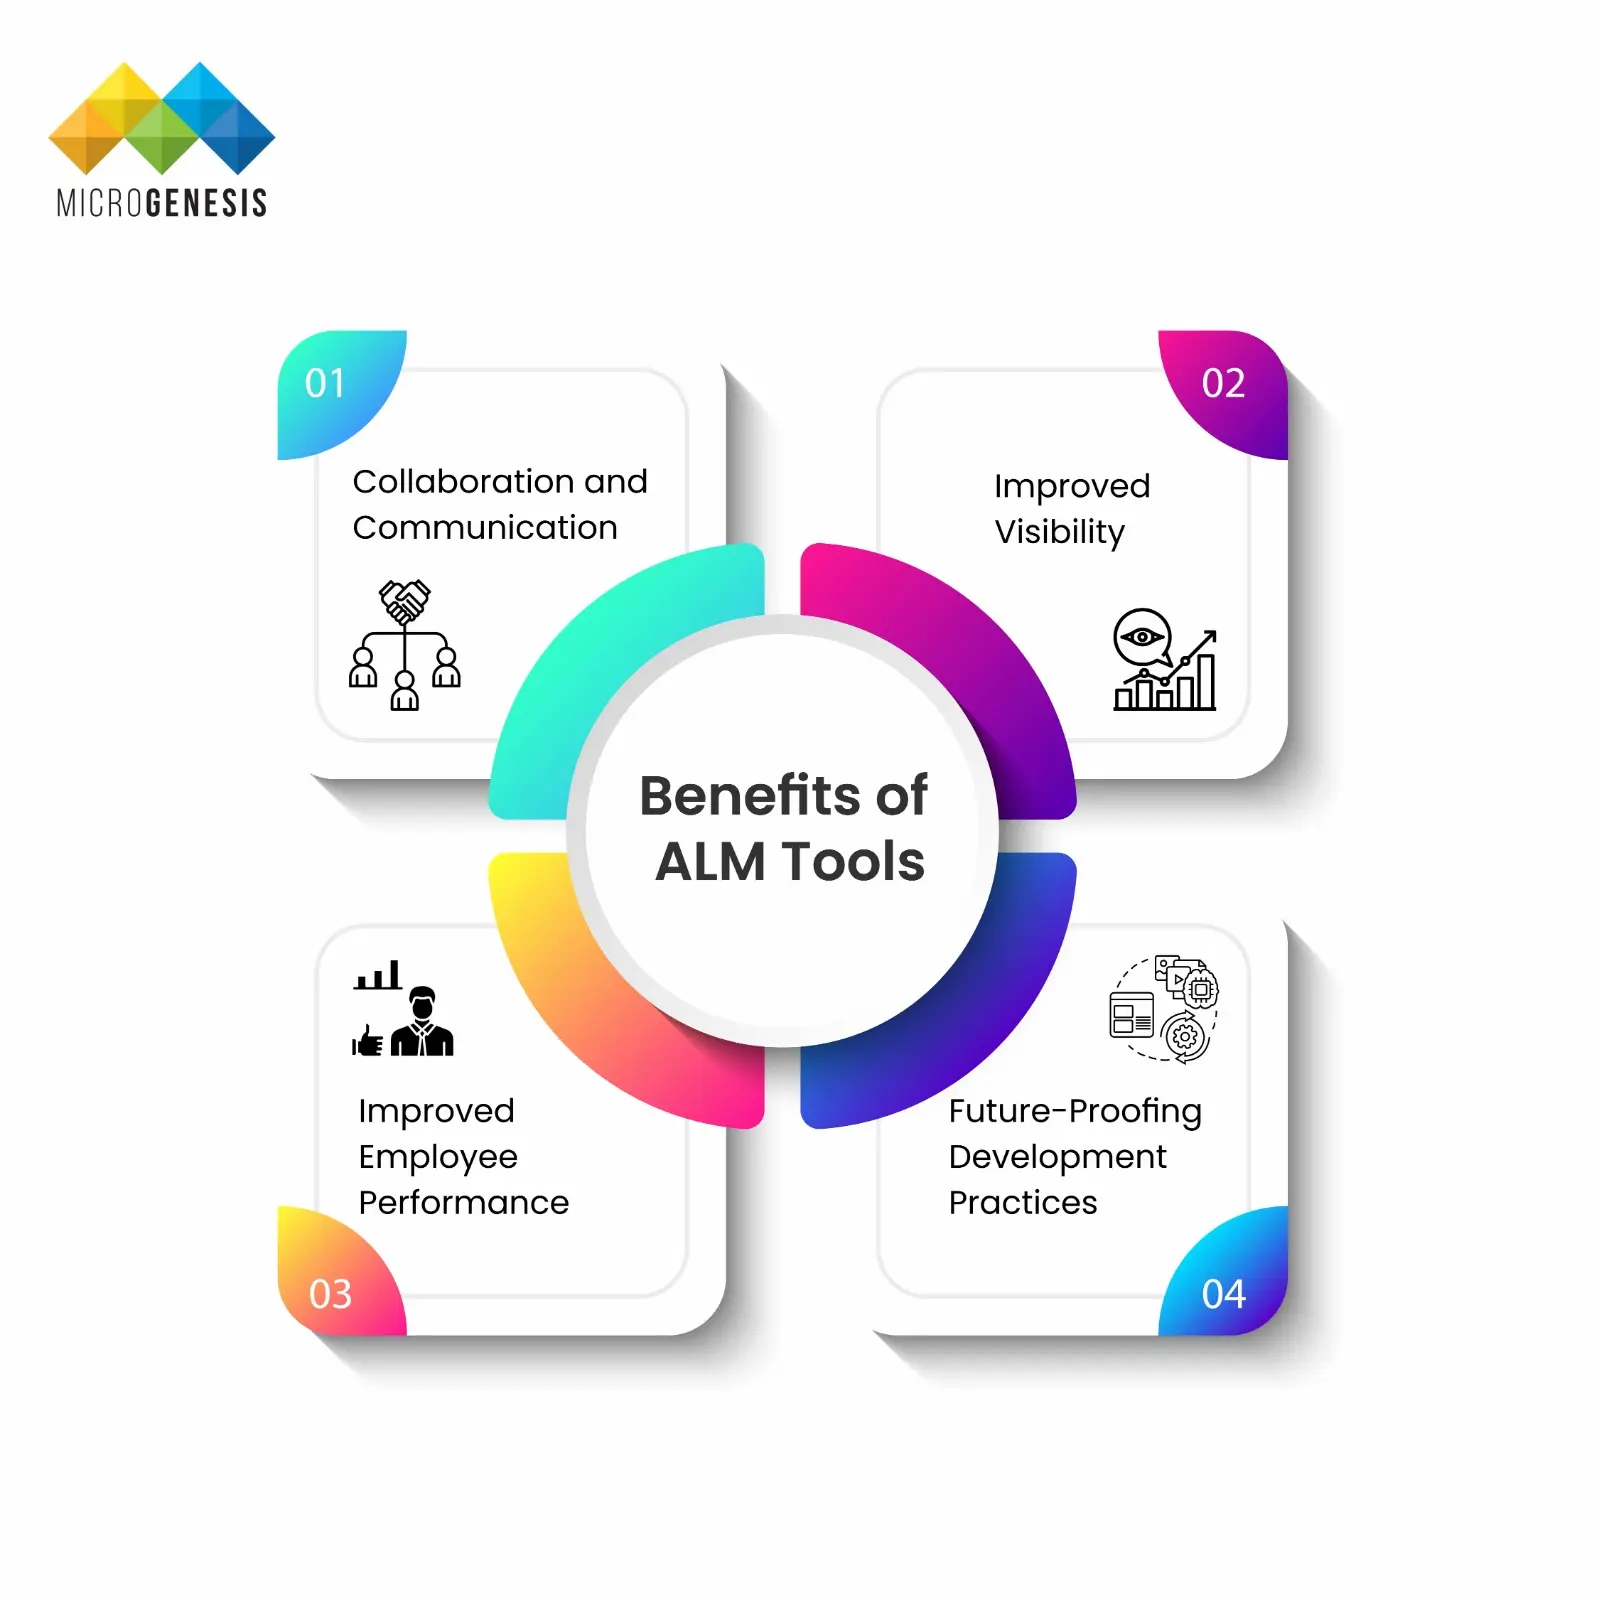 Benefits of ALM Tools